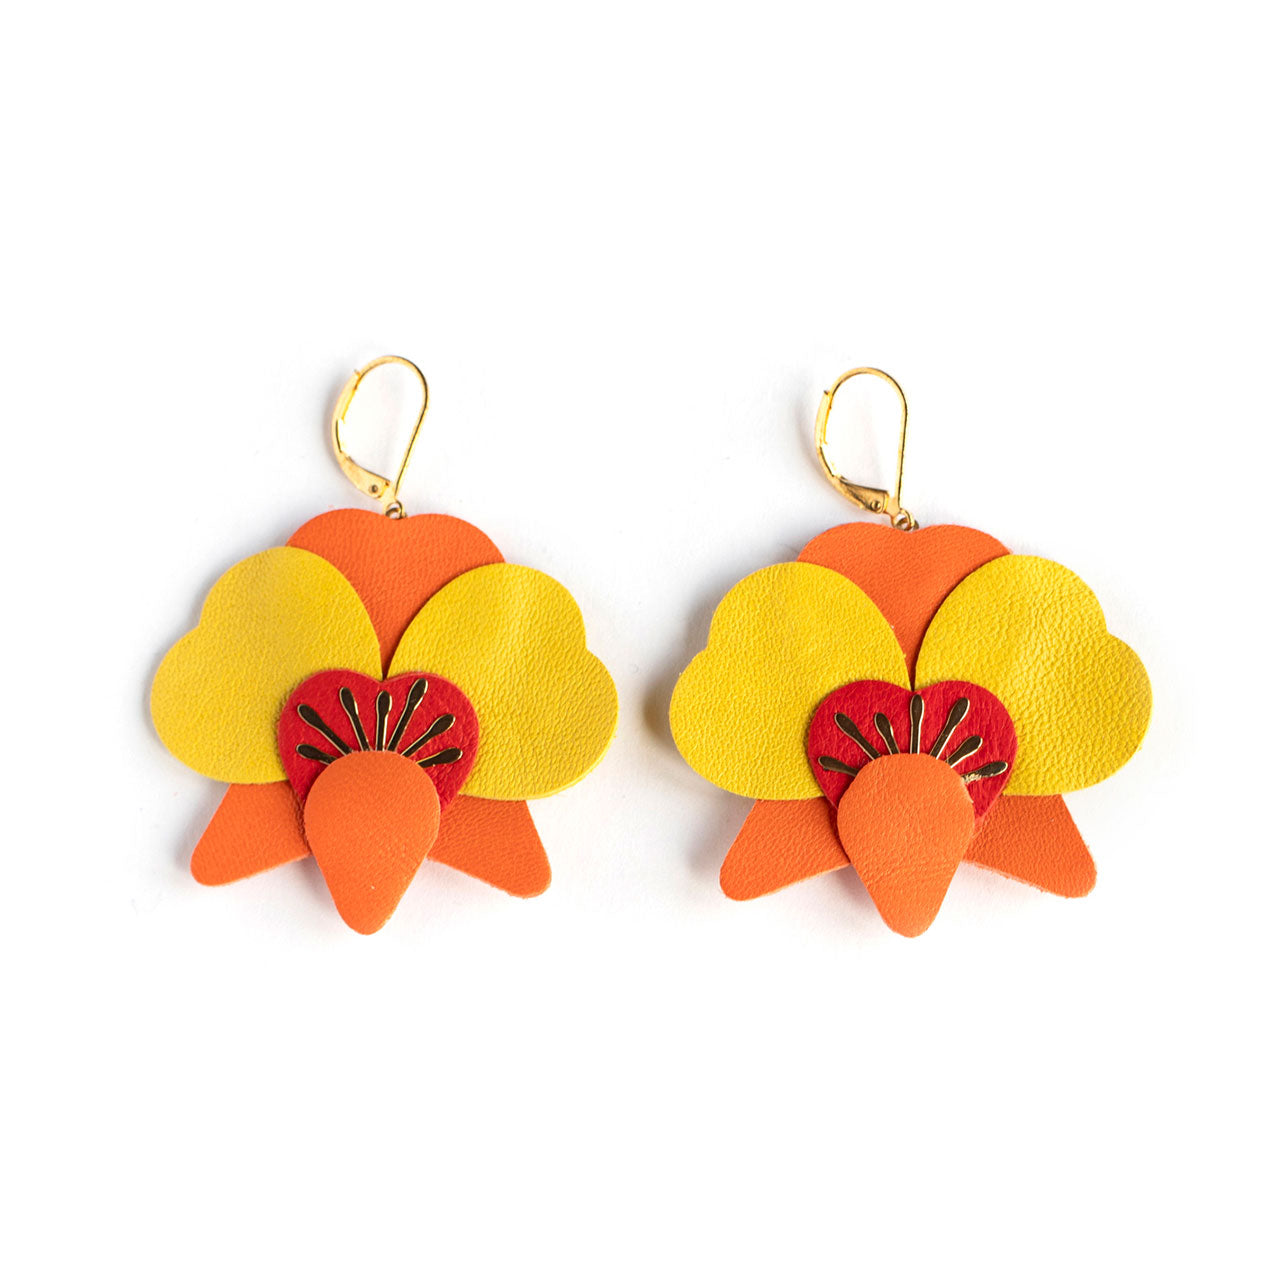 Orchid earrings - orange, red and yellow